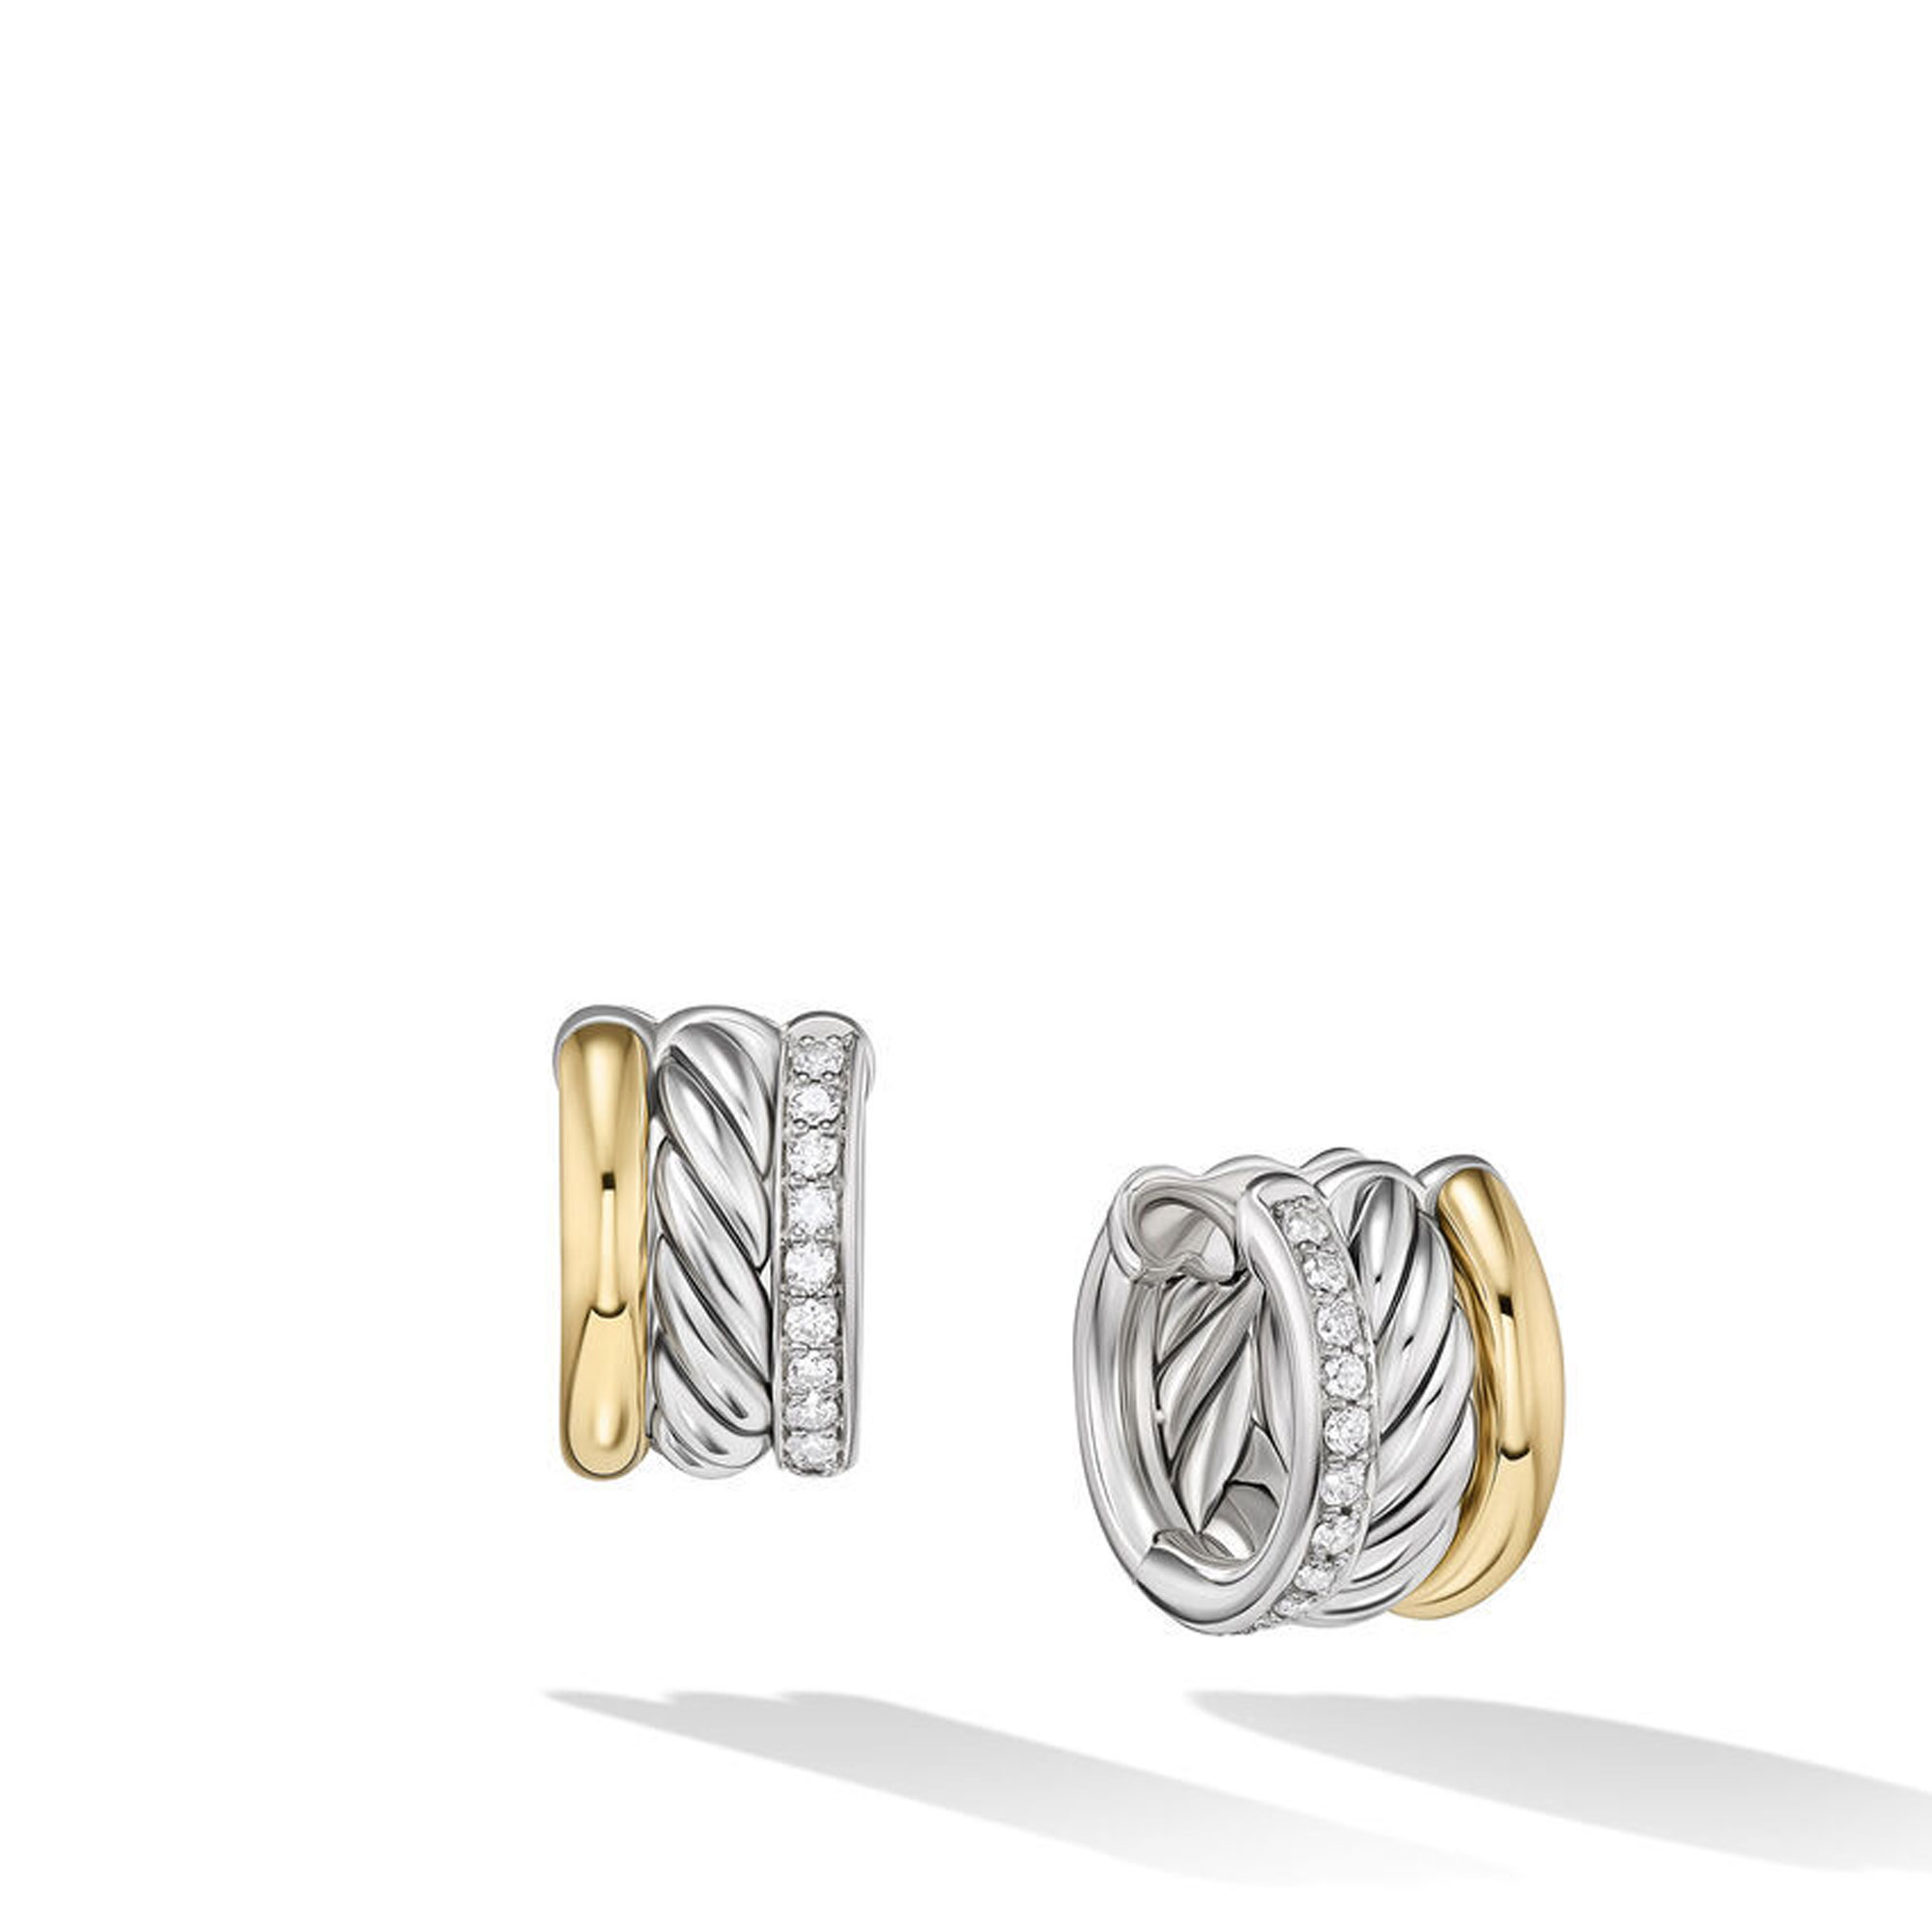 David Yurman Mercer Huggie Hoop Earrings in Sterling Silver with 18K Yellow Gold and Pave Diamonds